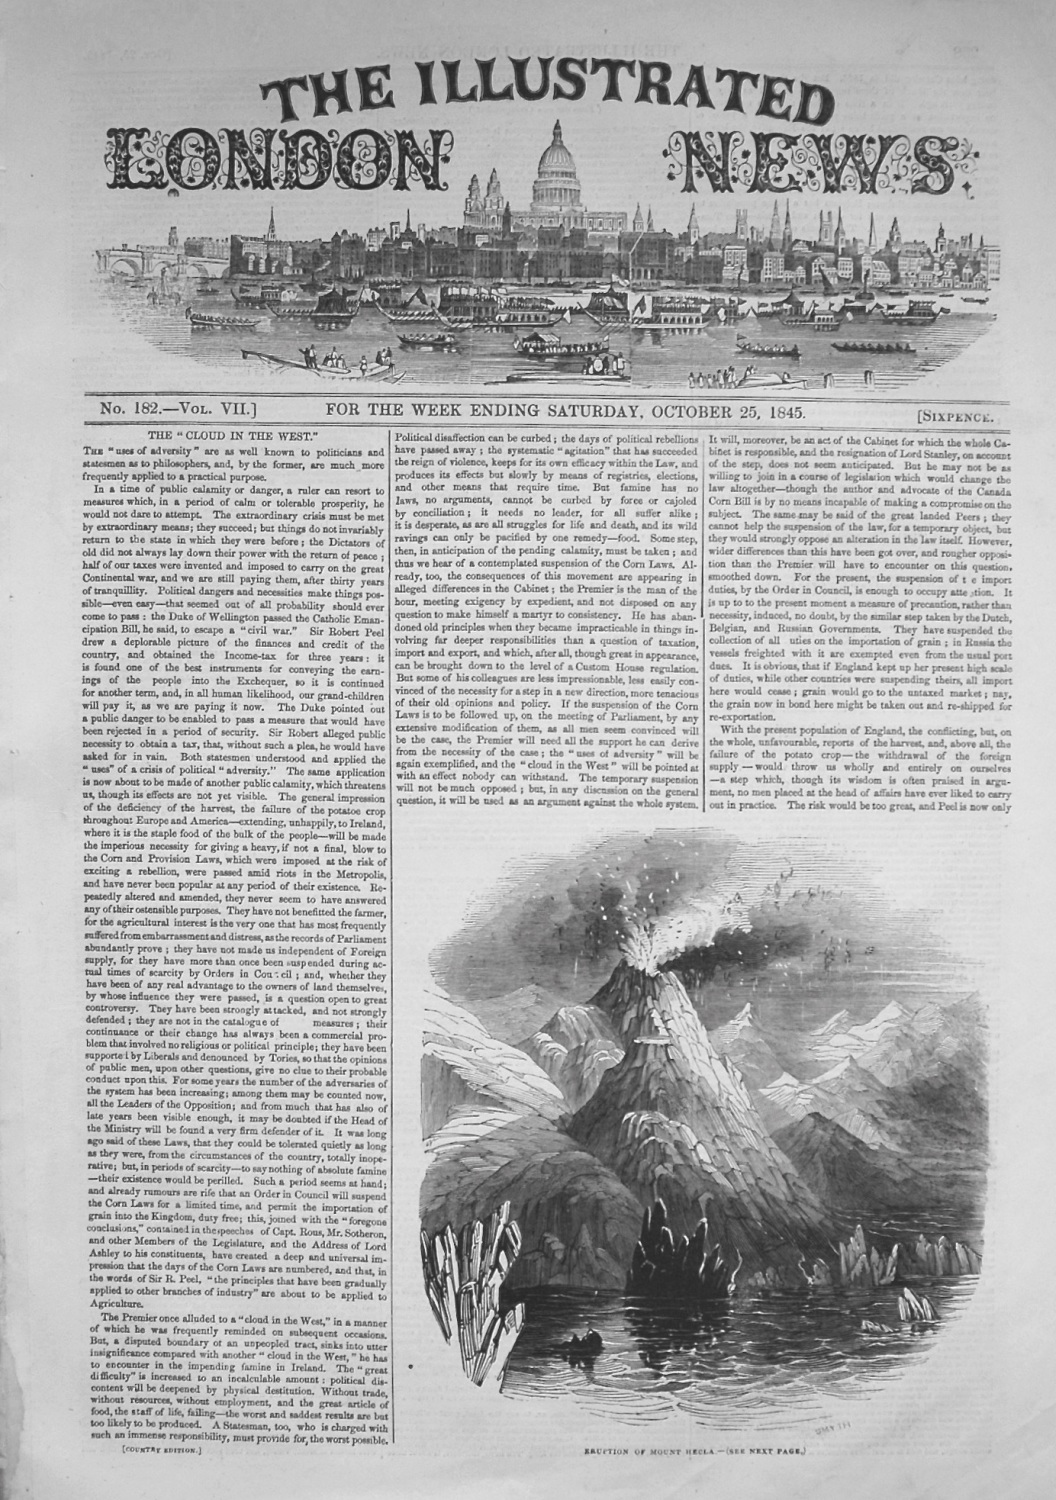 Illustrated London News. October 25th, 1845.